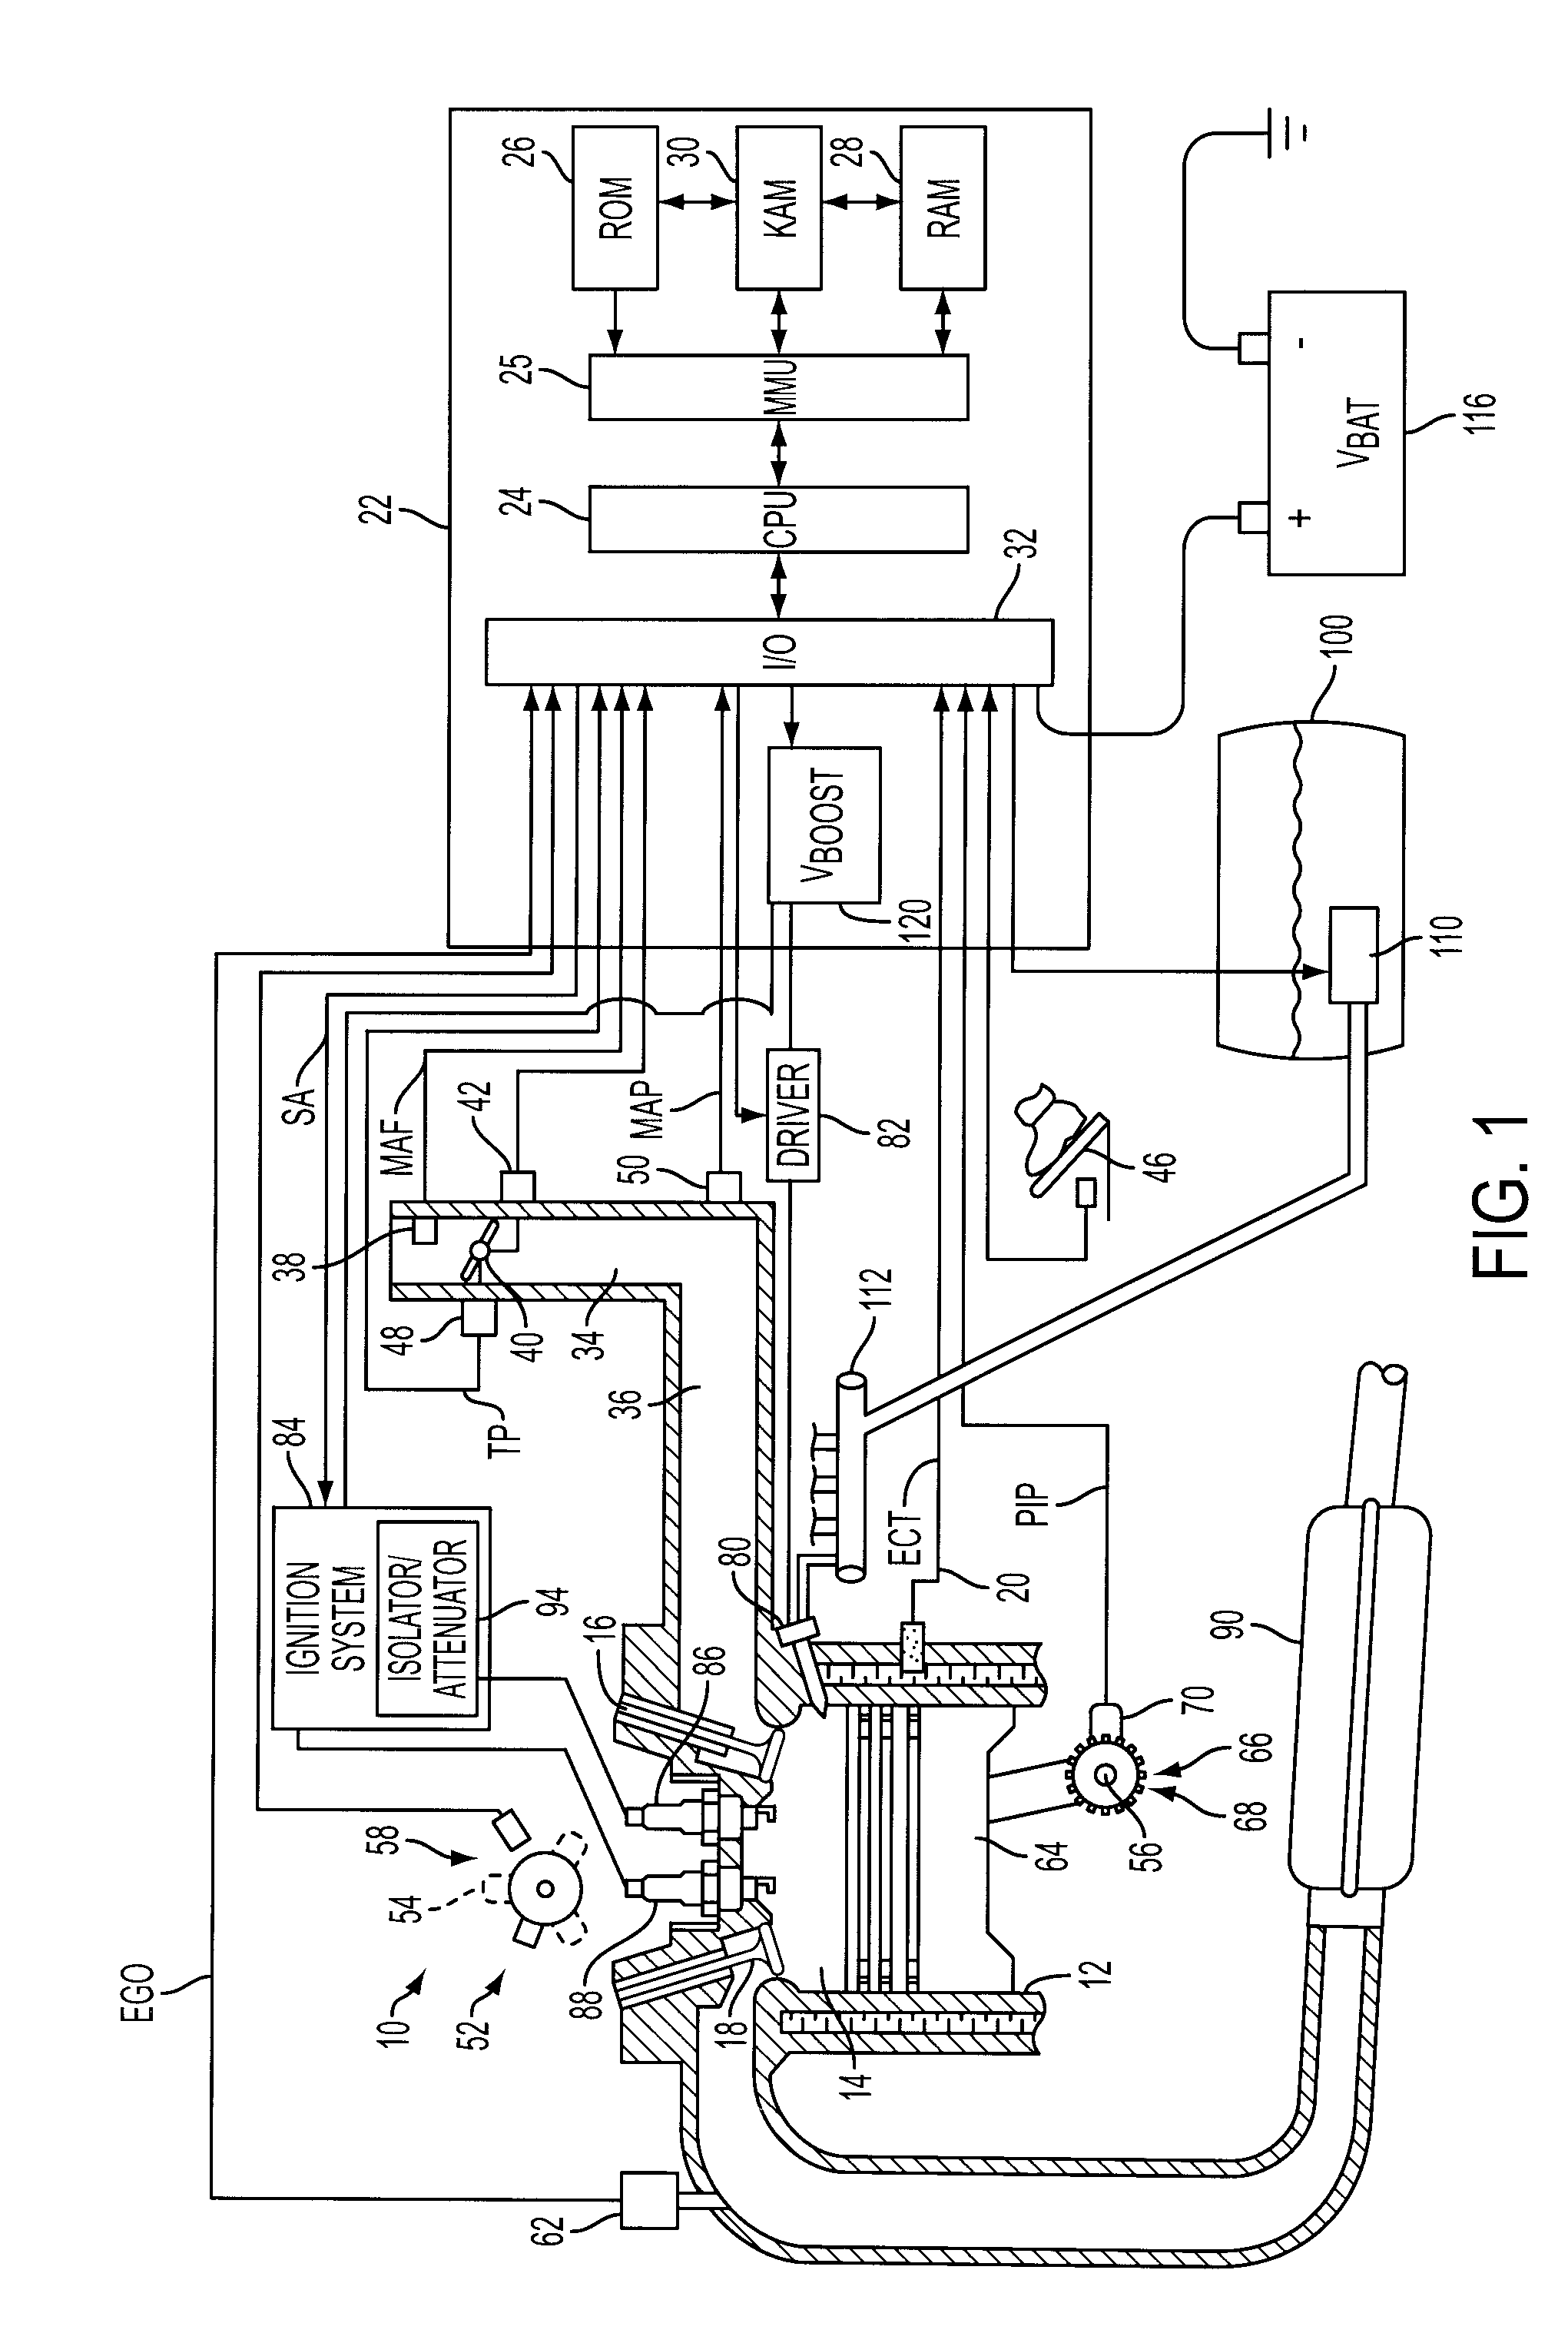 Internal combustion engine with multiple spark plugs per cylinder and ion current sensing